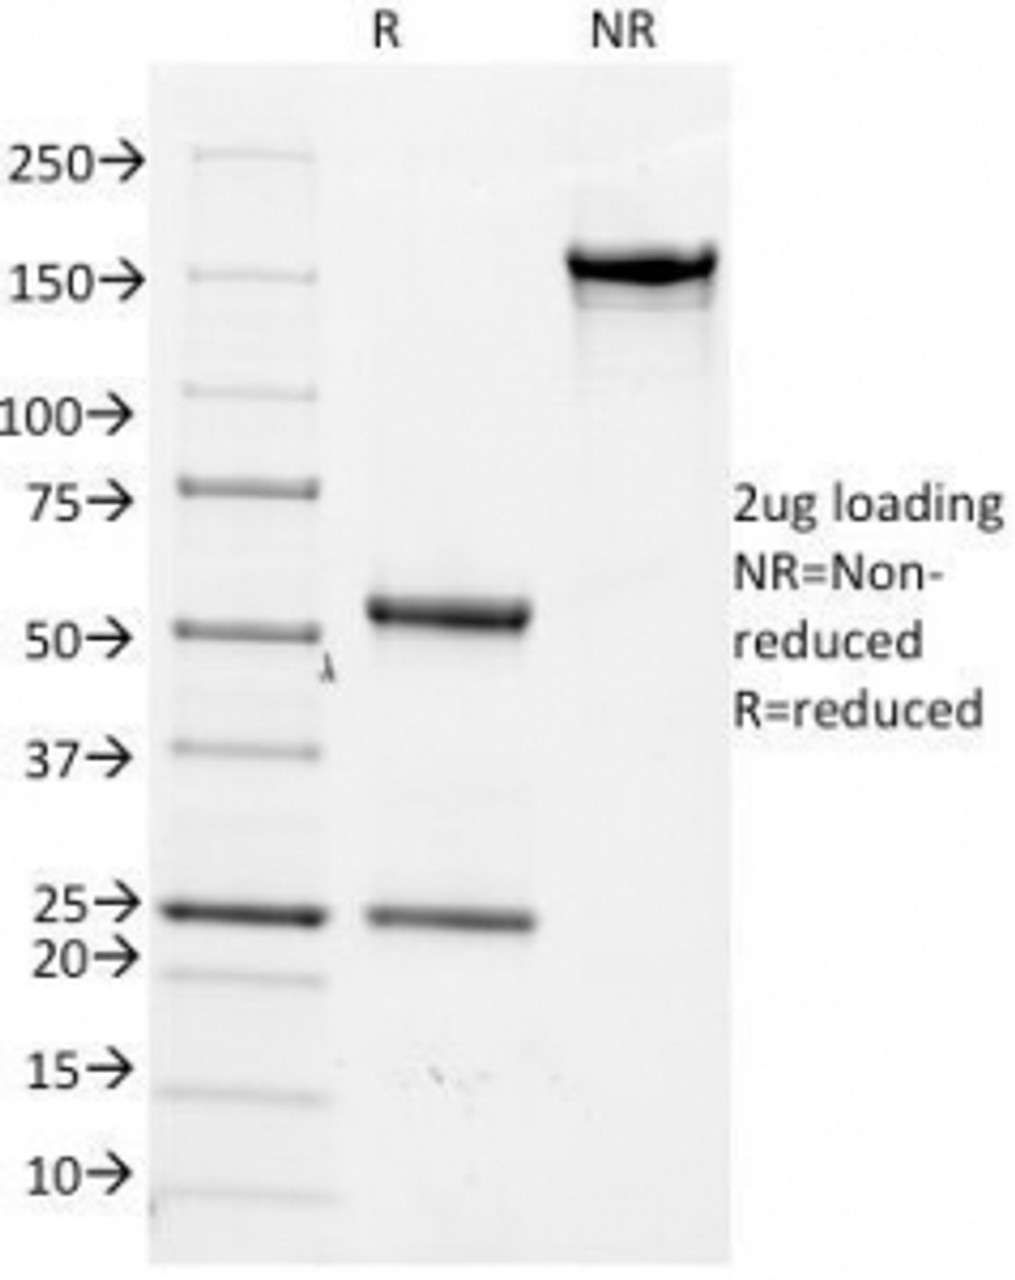 SDS-PAGE Analysis of Purified, BSA-Free Cdc20 Antibody (clone AR12) . Confirmation of Integrity and Purity of the Antibody.